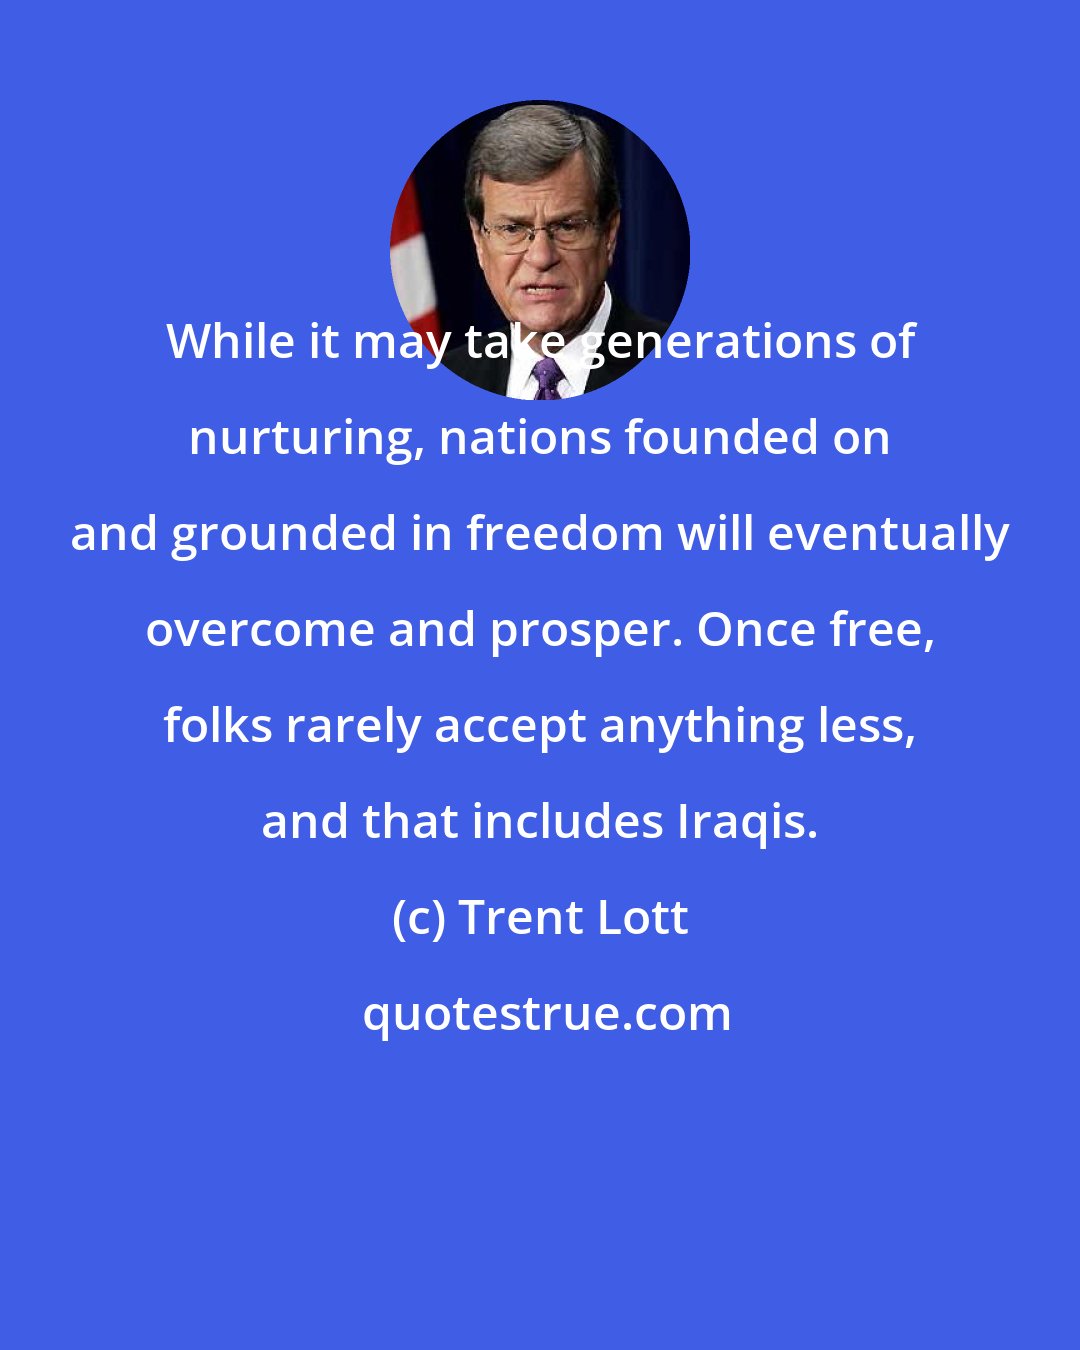 Trent Lott: While it may take generations of nurturing, nations founded on and grounded in freedom will eventually overcome and prosper. Once free, folks rarely accept anything less, and that includes Iraqis.